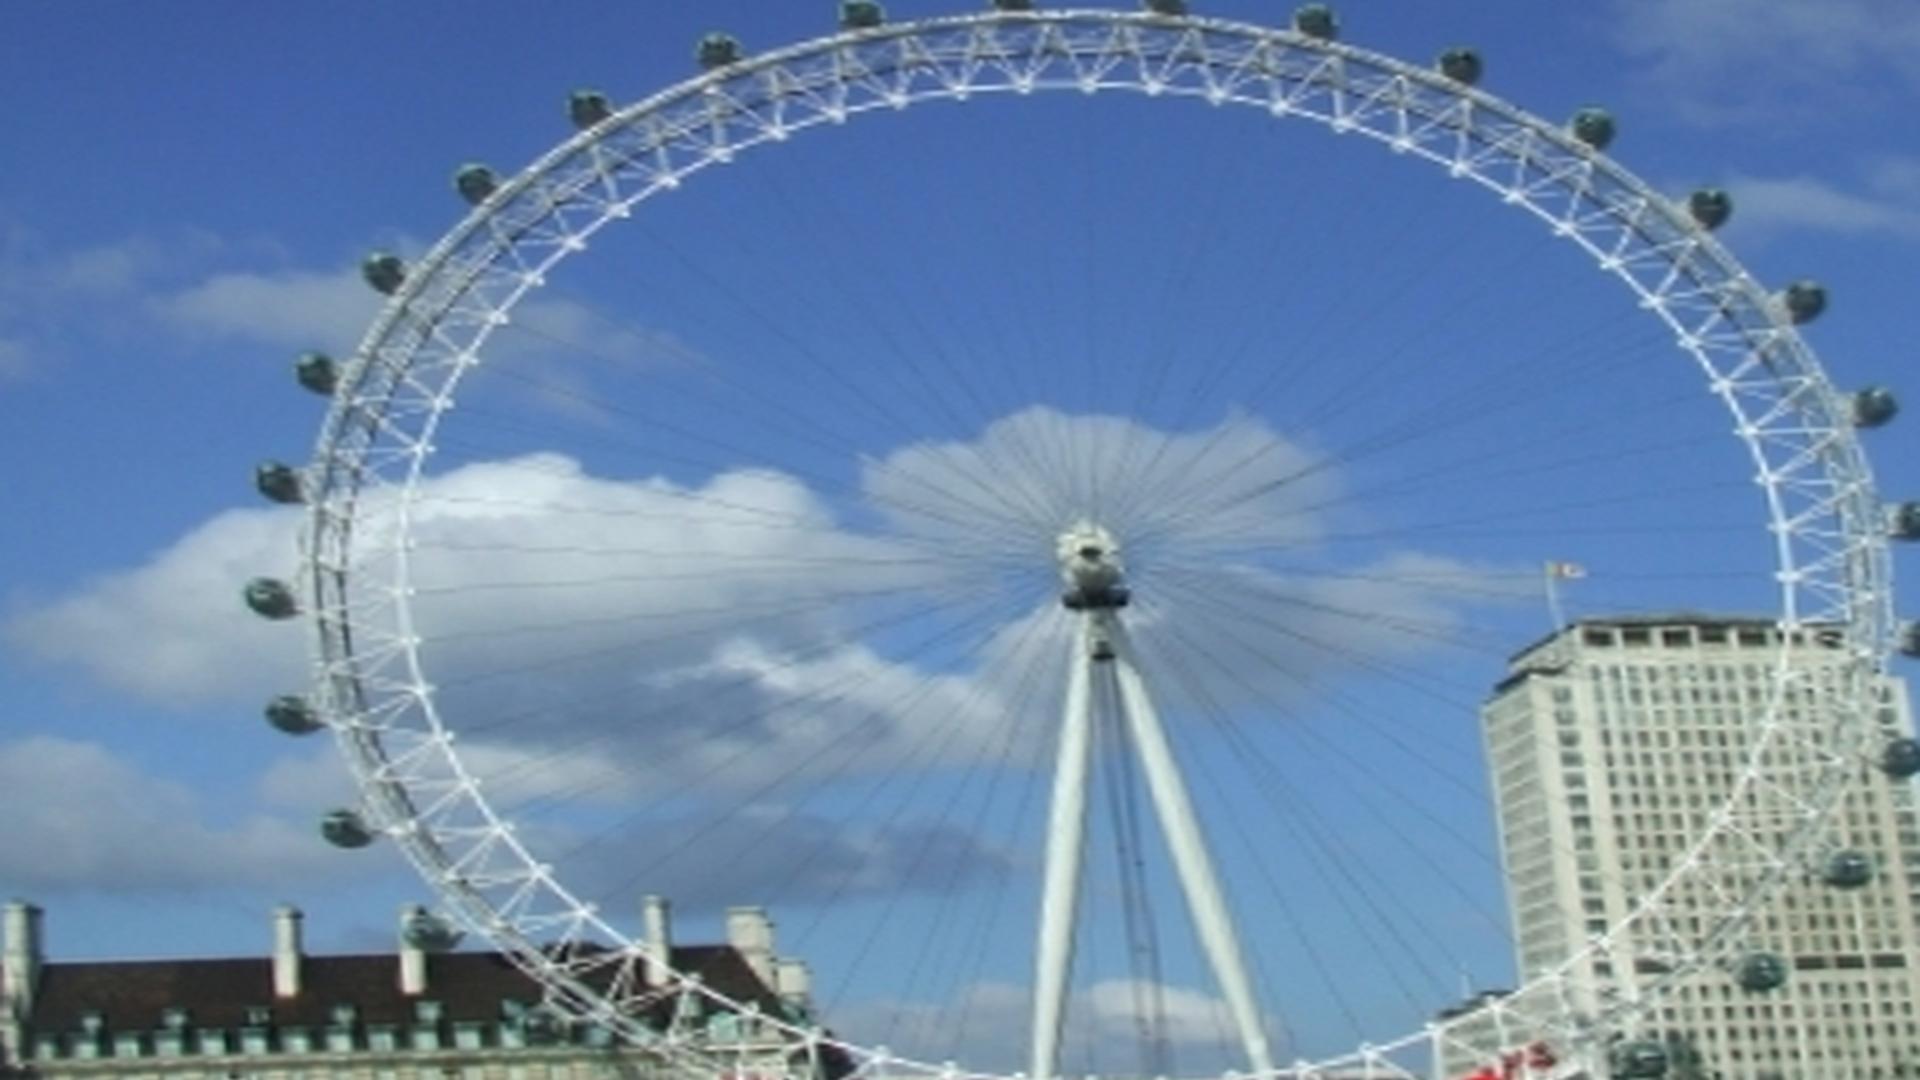 Facts About The London Eye